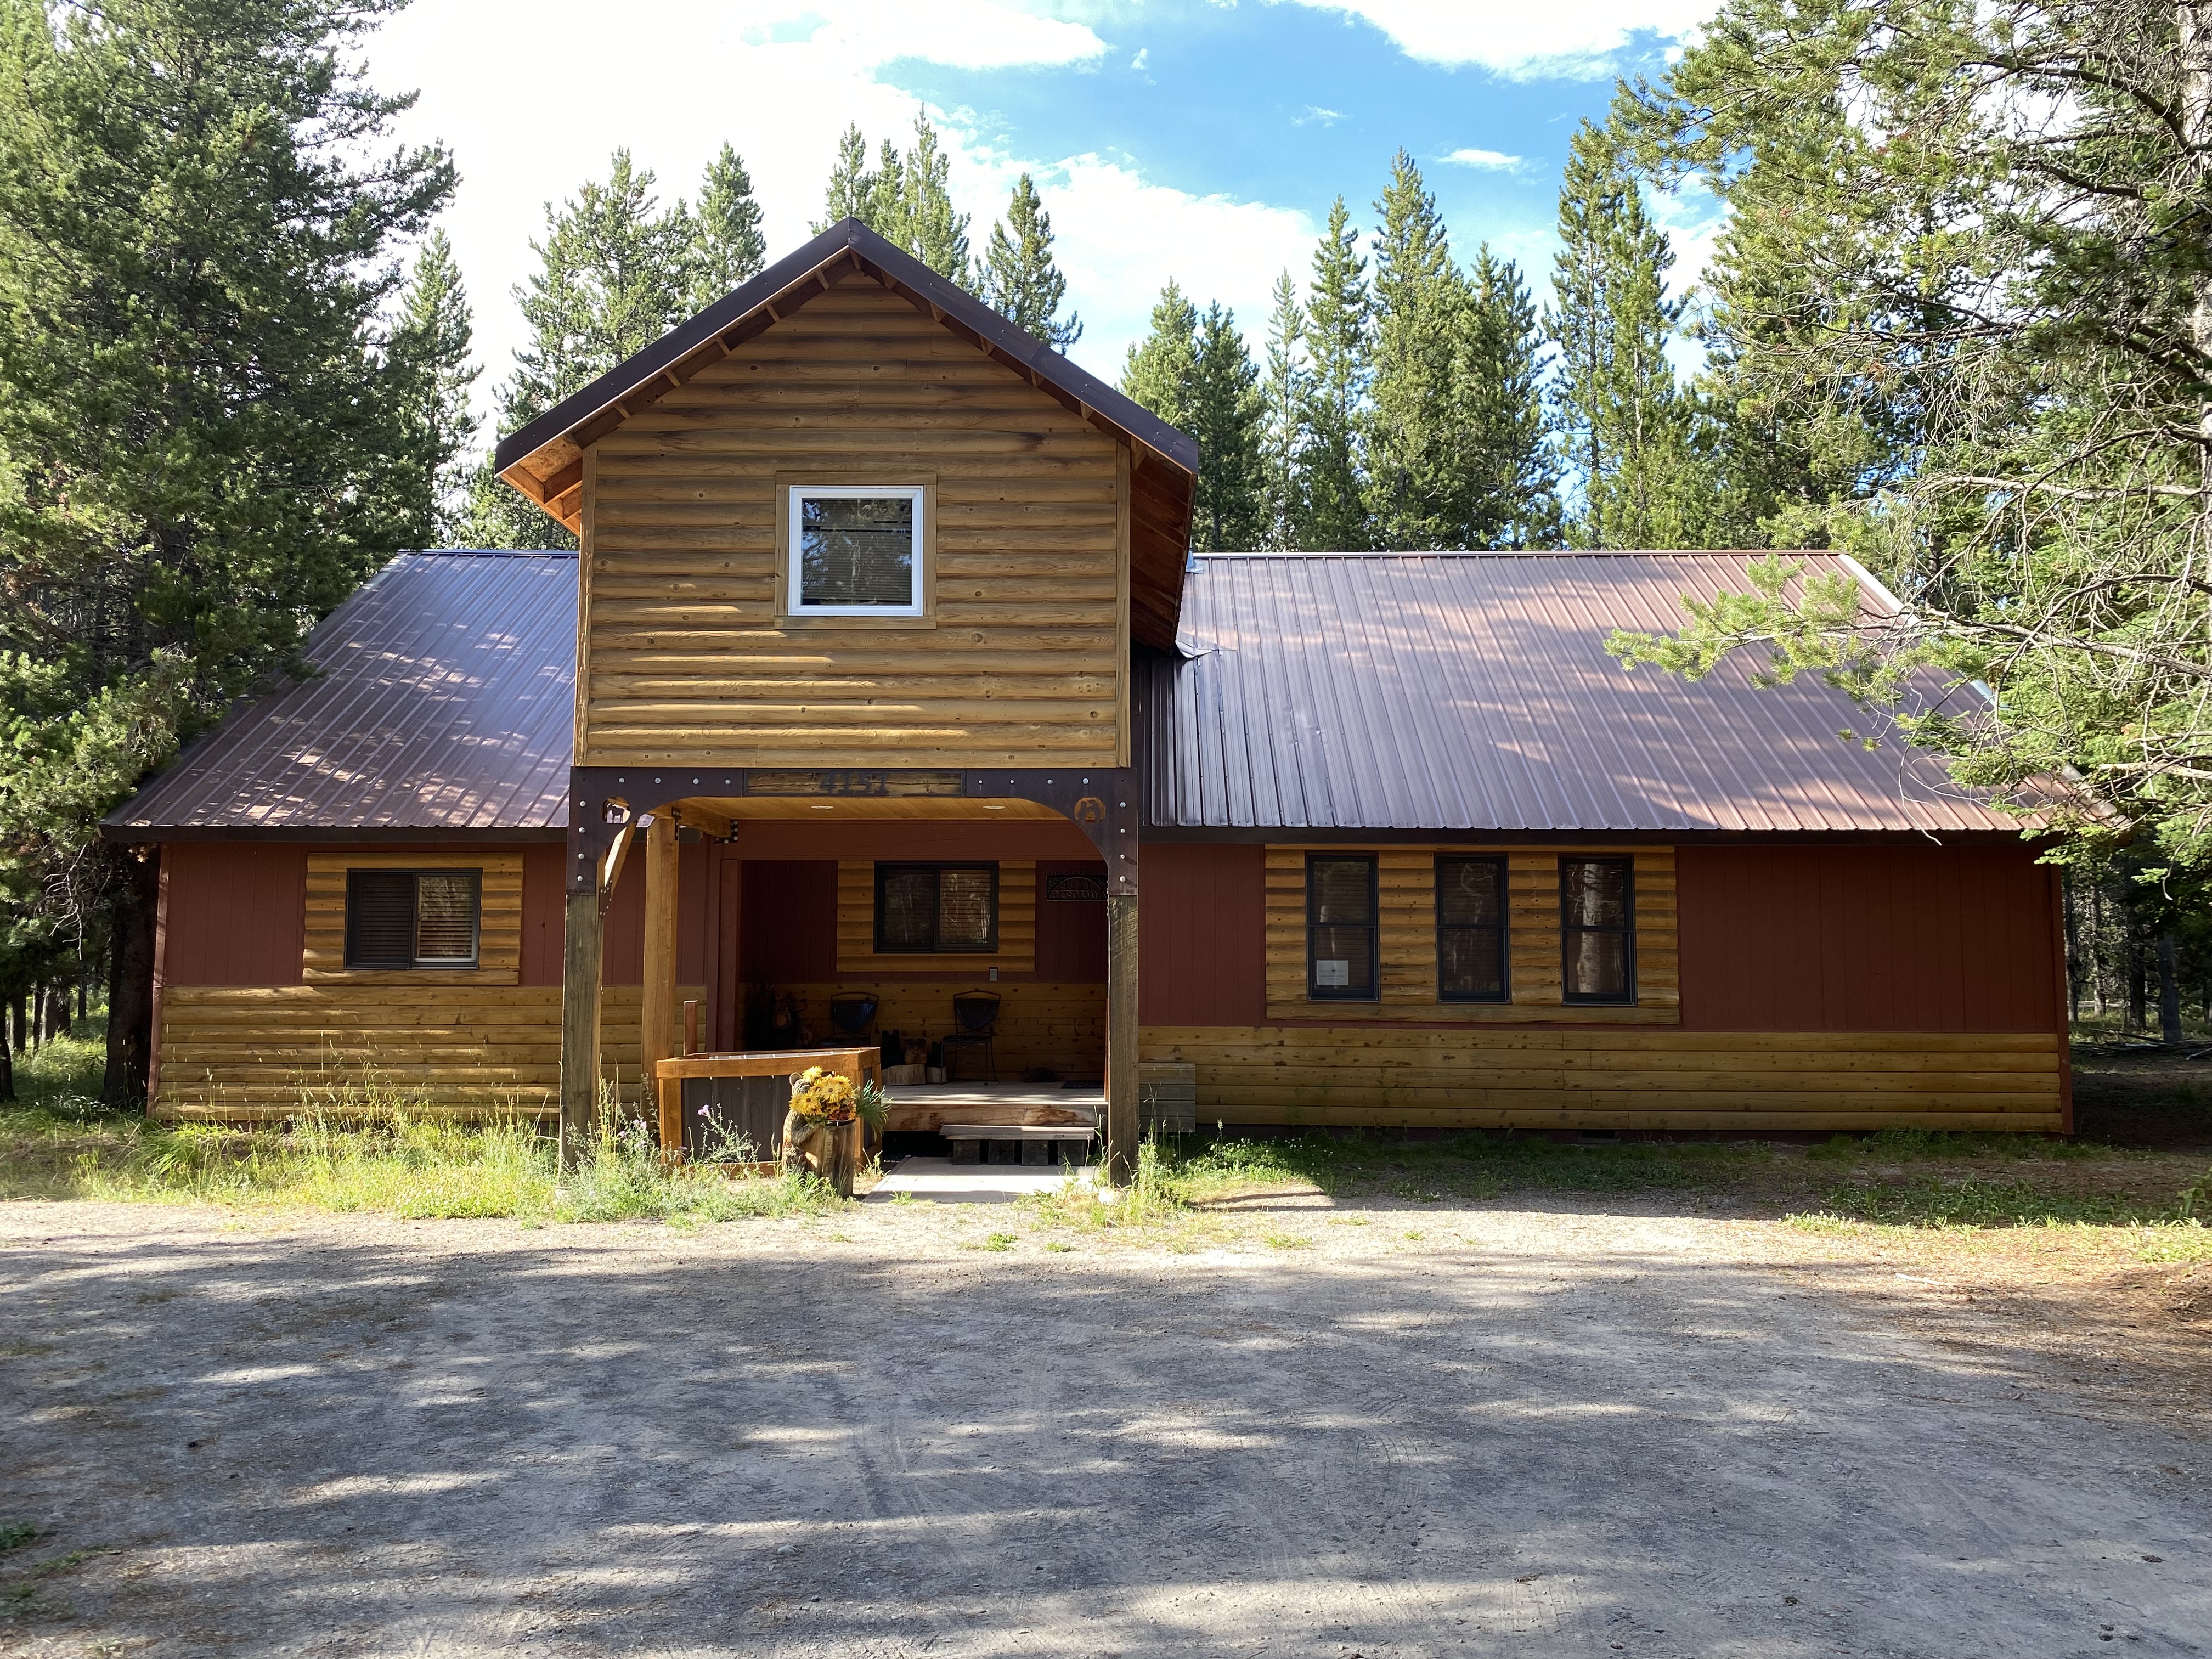 Bears Den* 5Br, 2Ba, Pet Friendly, Wifi, Bbq Grill, 24 Miles to Yellowstone